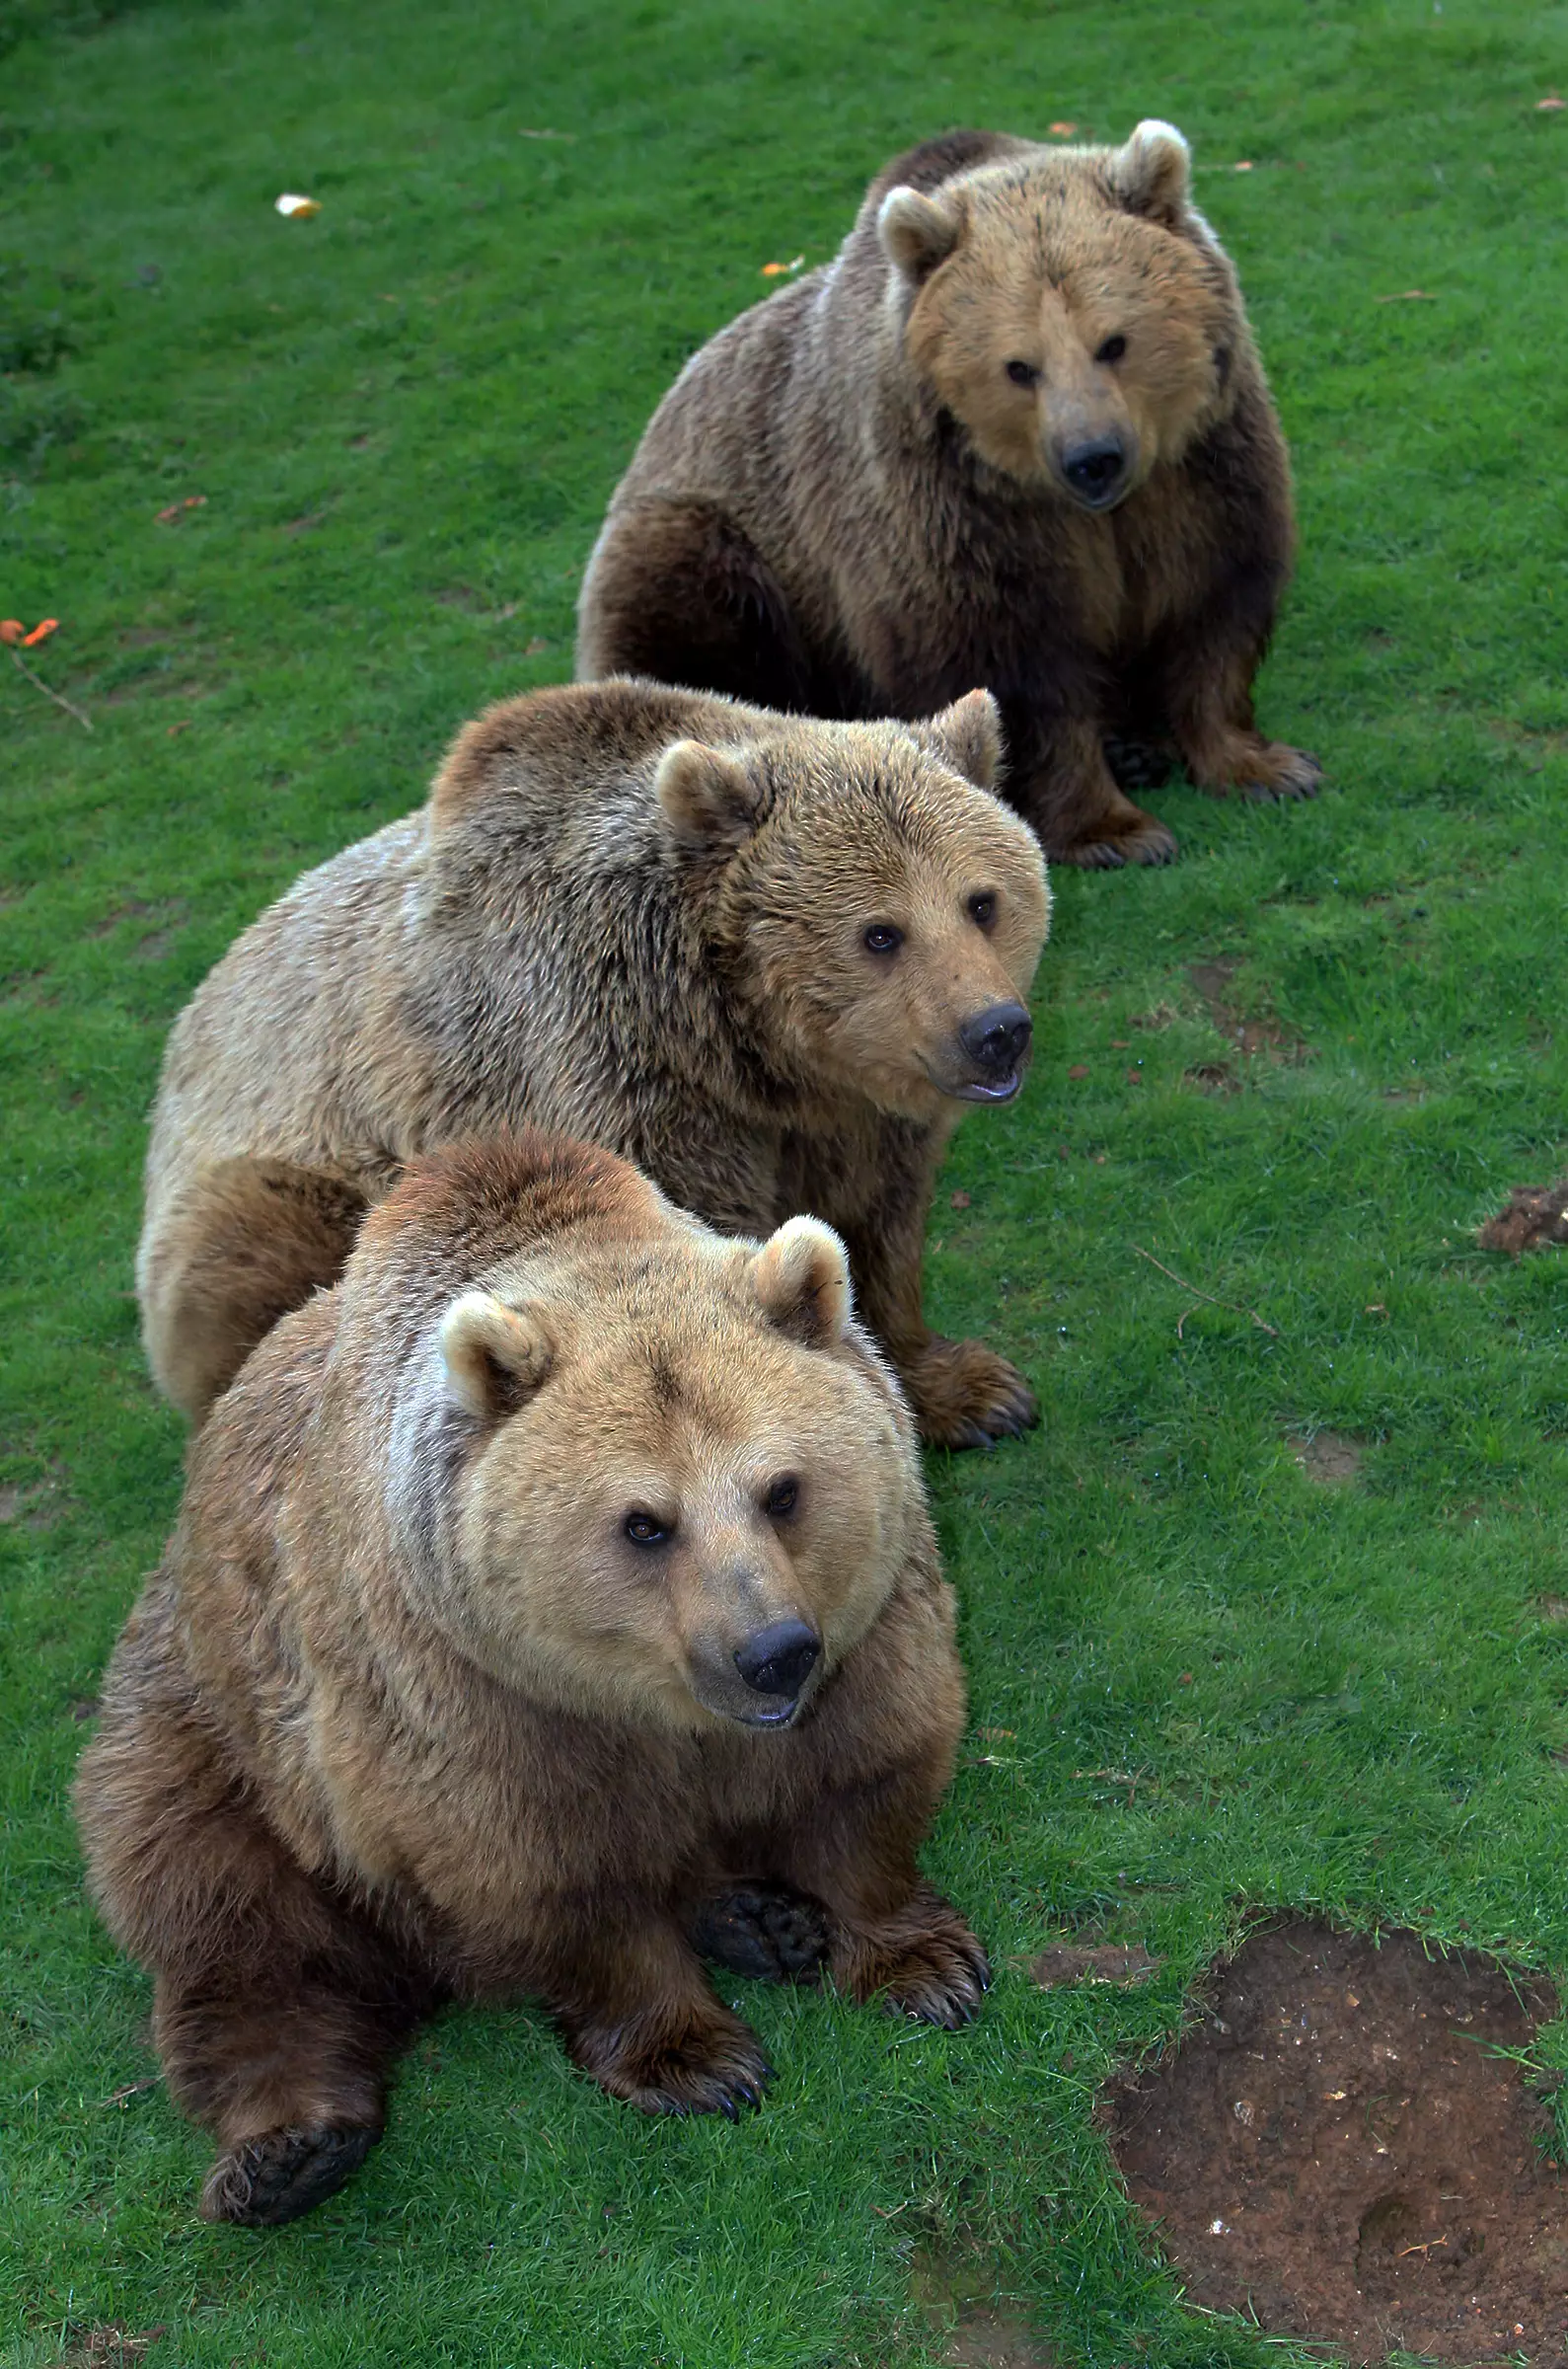 The three brown bears at Whipsnade Zoo: Snow White, Sleeping Beauty and Cinderella.